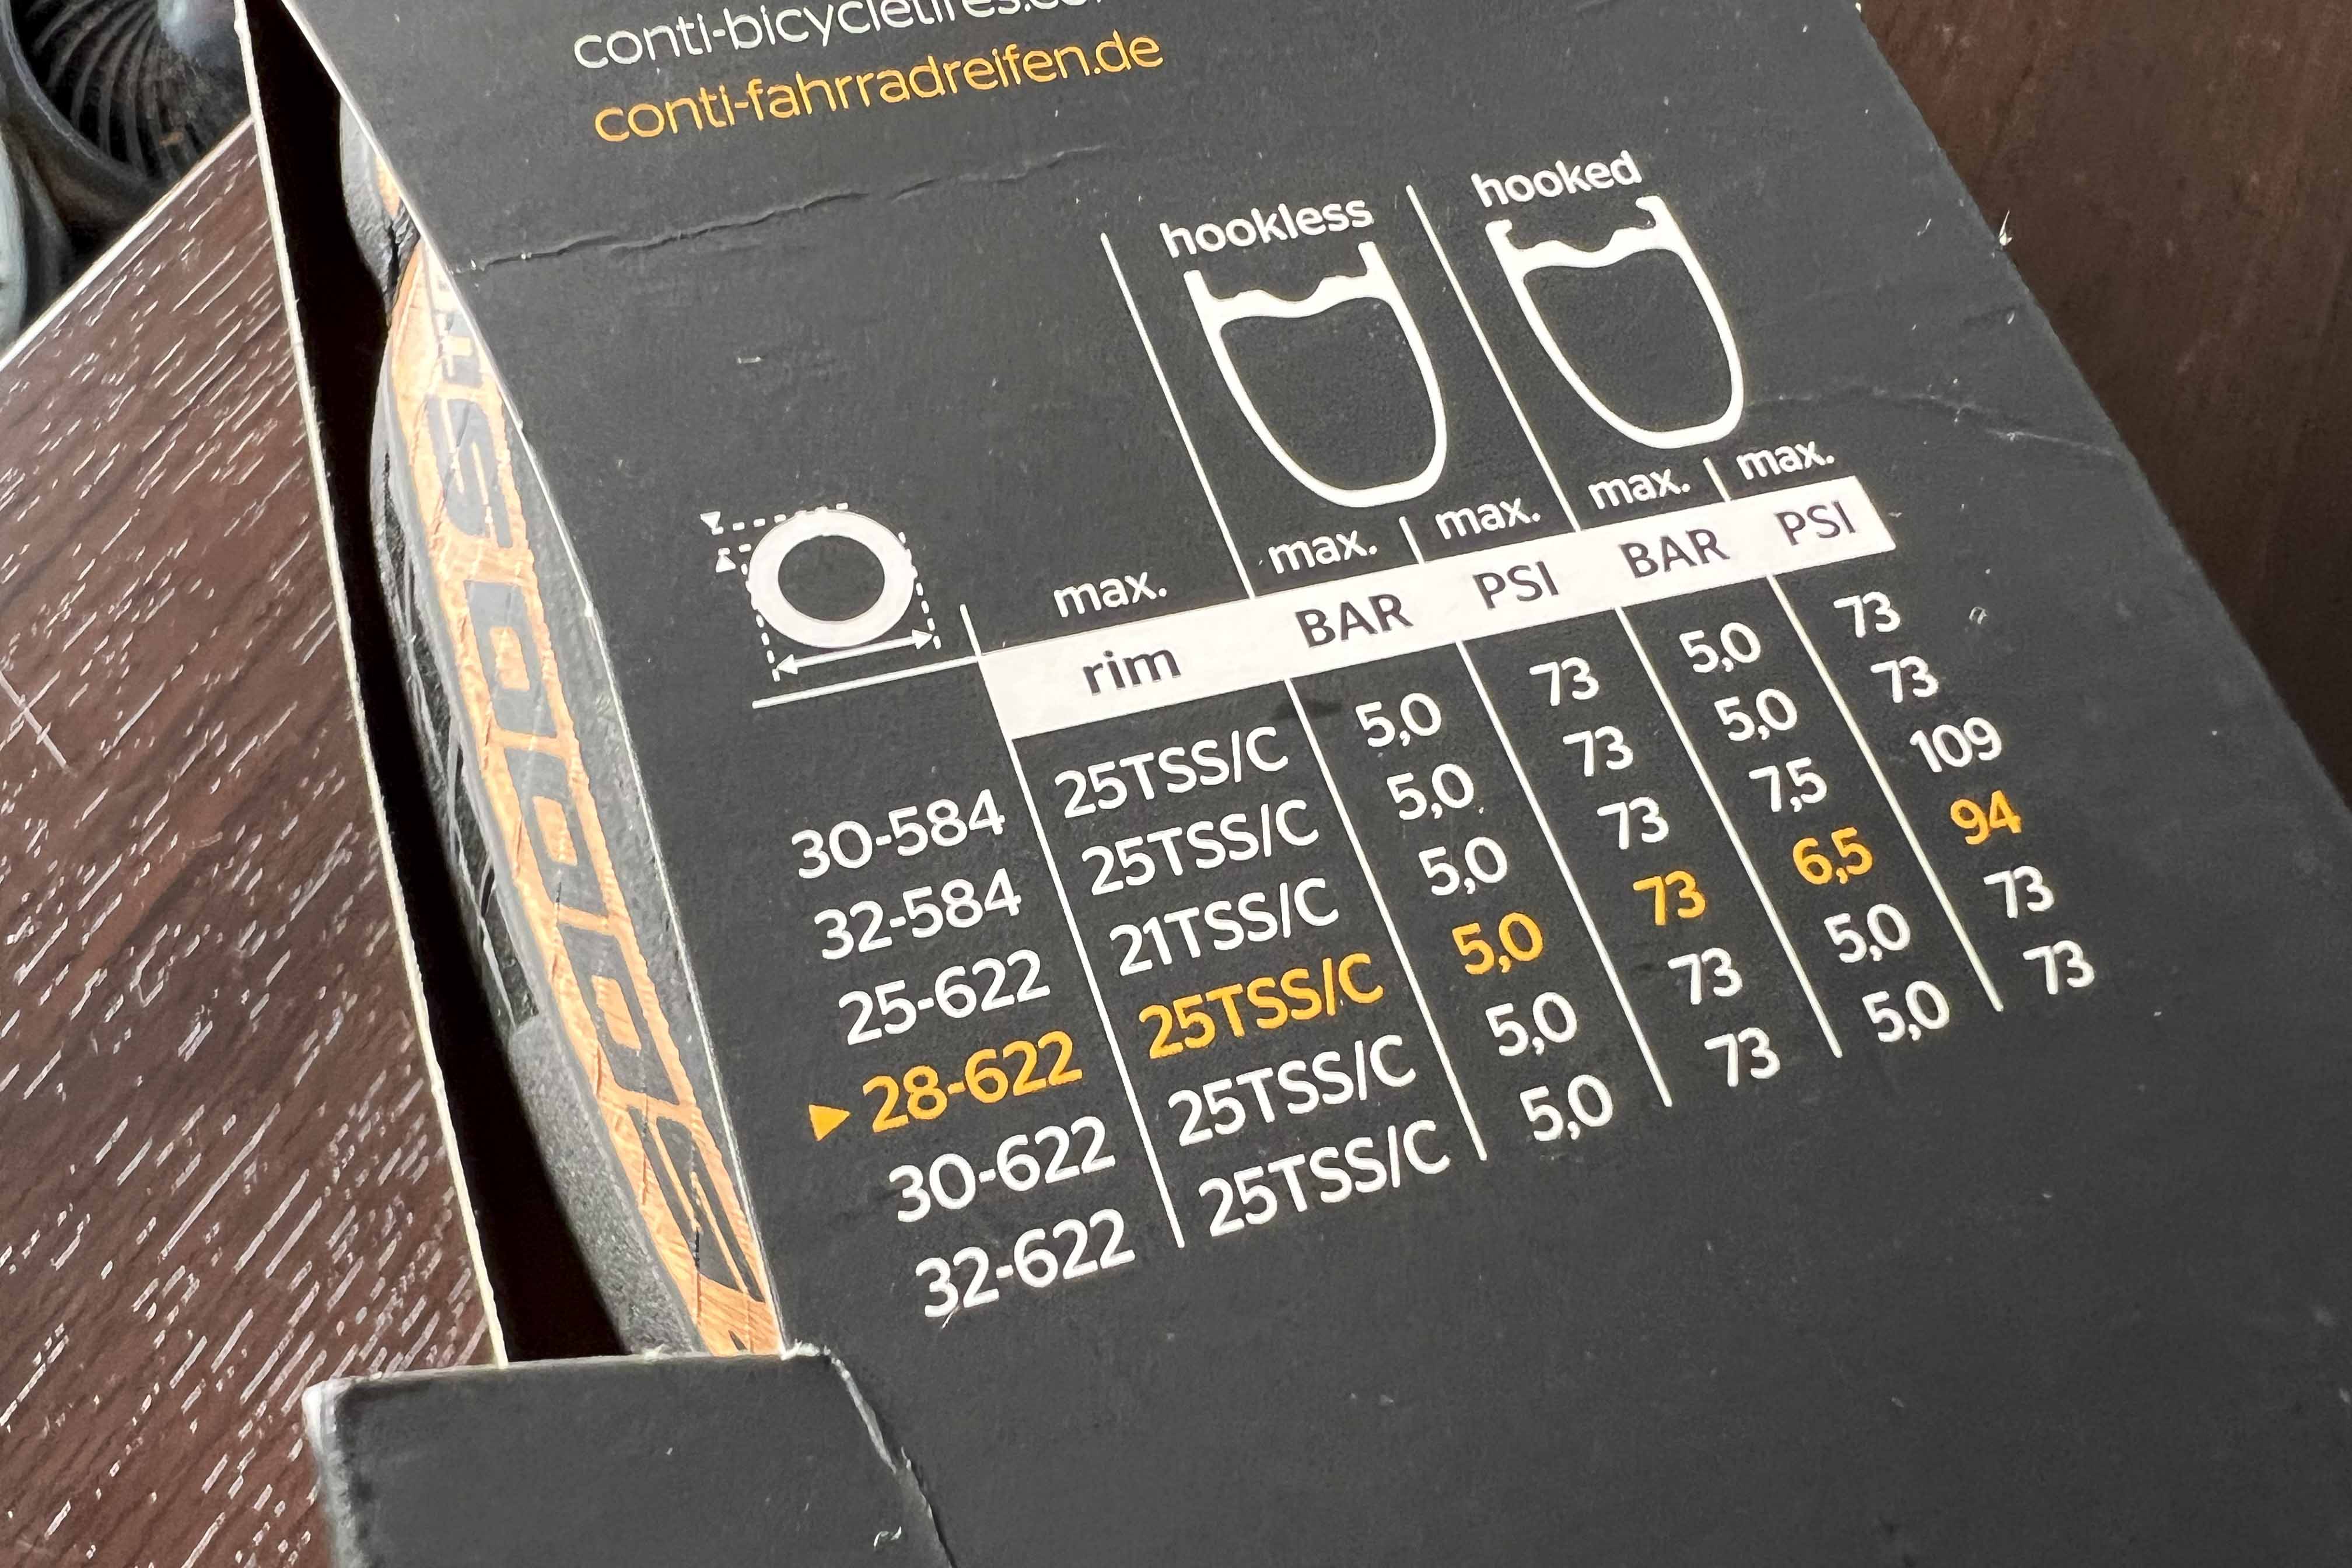 Continental GP5000TL hookless tire packaging showing maximum psi values per sized tire